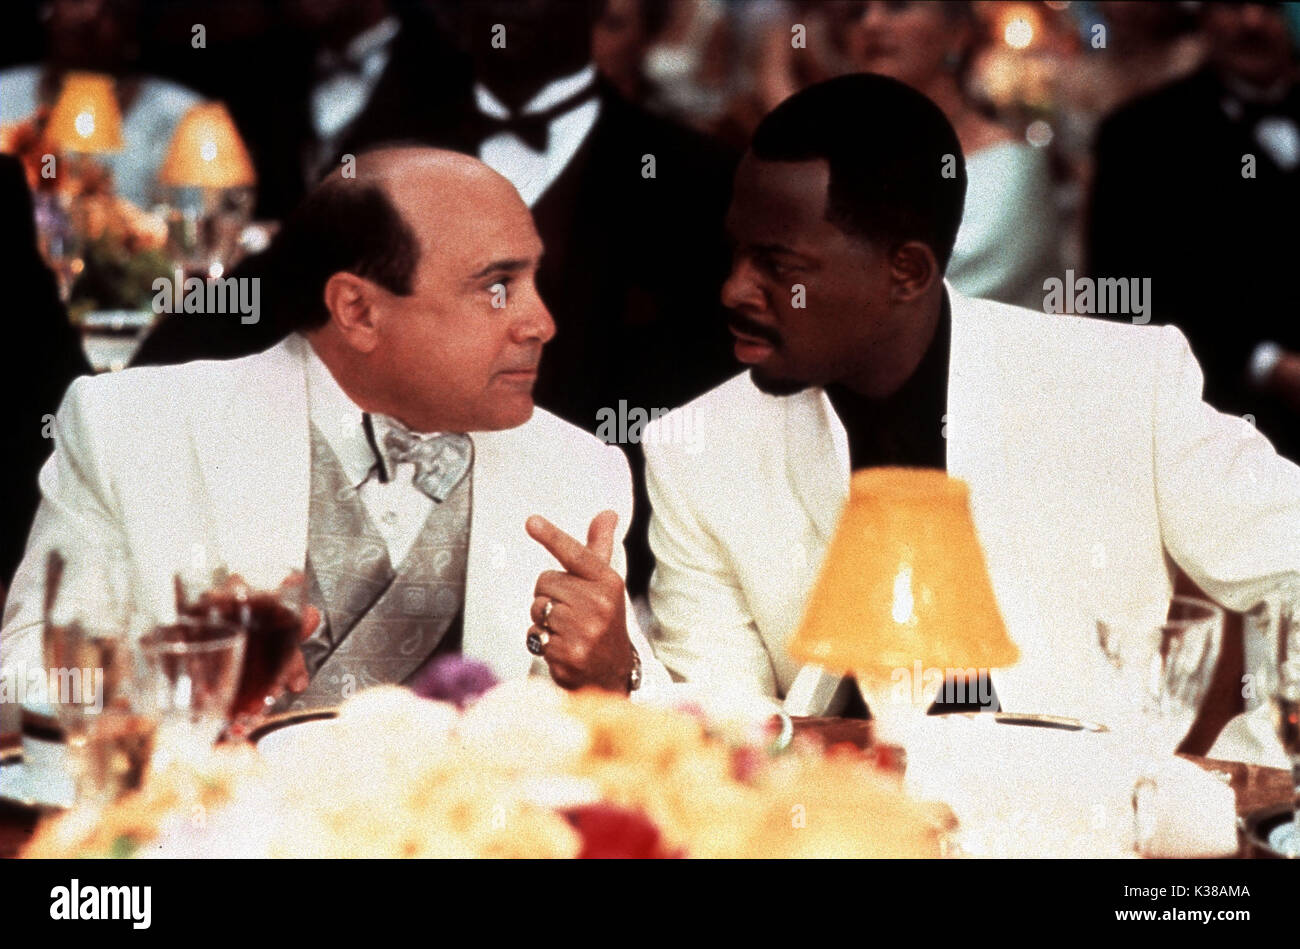 WHAT'S THE WORST THING THAT COULD HAPPEN? (US 2001) HYDE PARK ENT/MGM/TURMAN MORRISSEY CO DANNY DEVITO, MARTIN LAWRENCE     Date: 2001 Stock Photo